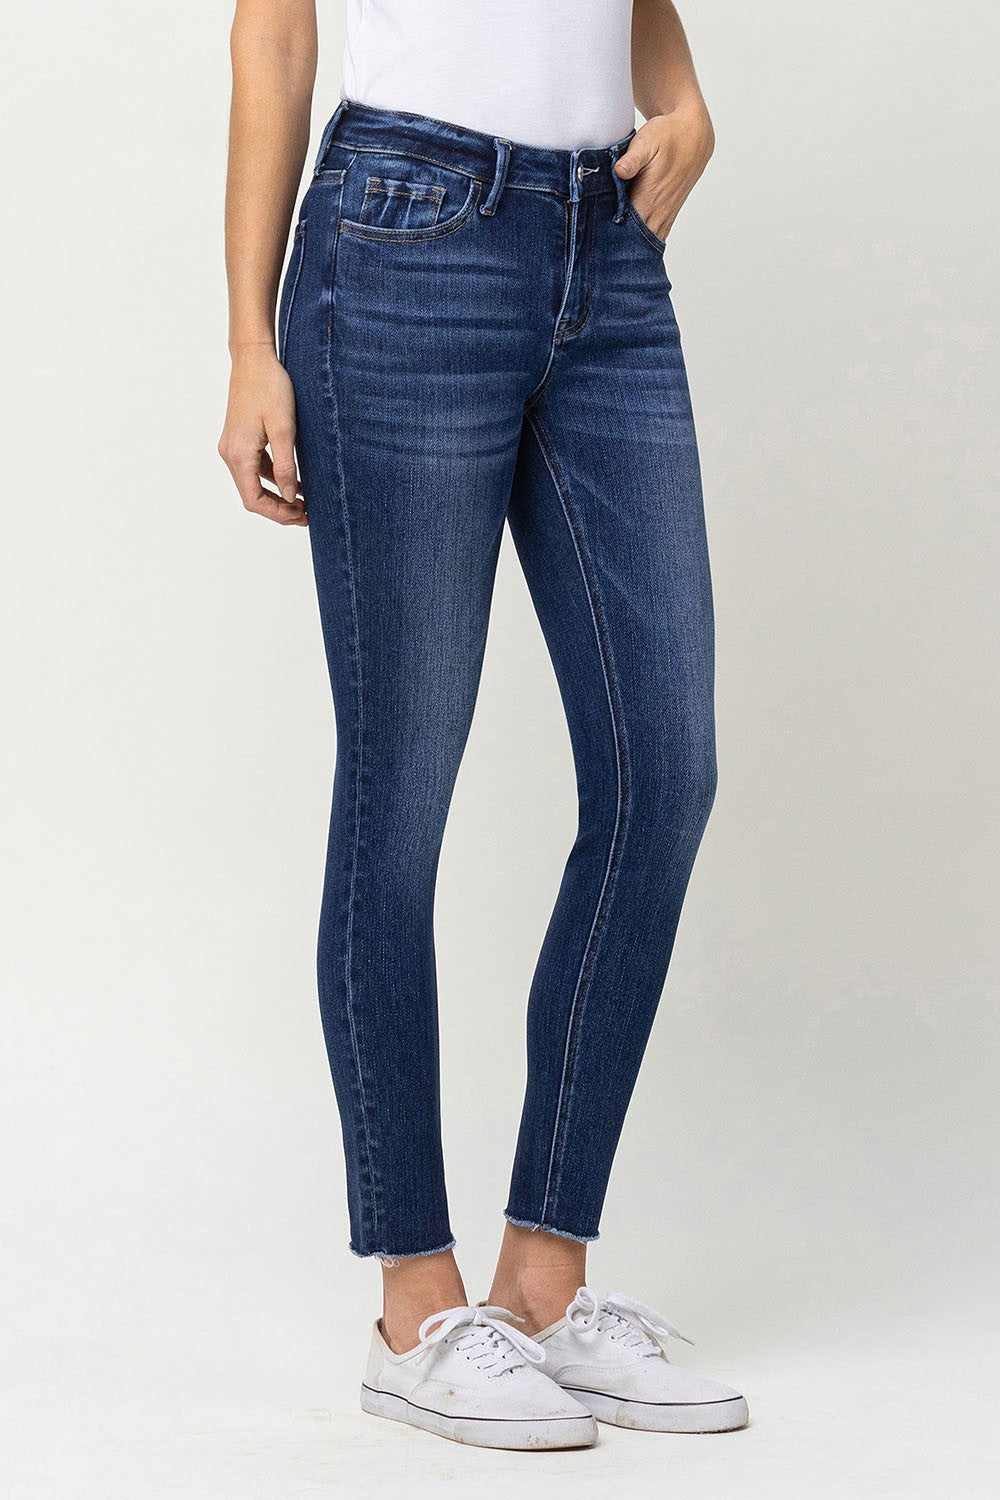 The Vervet Amber Mid Rise Crop Skinny Jeans - Southern Sol